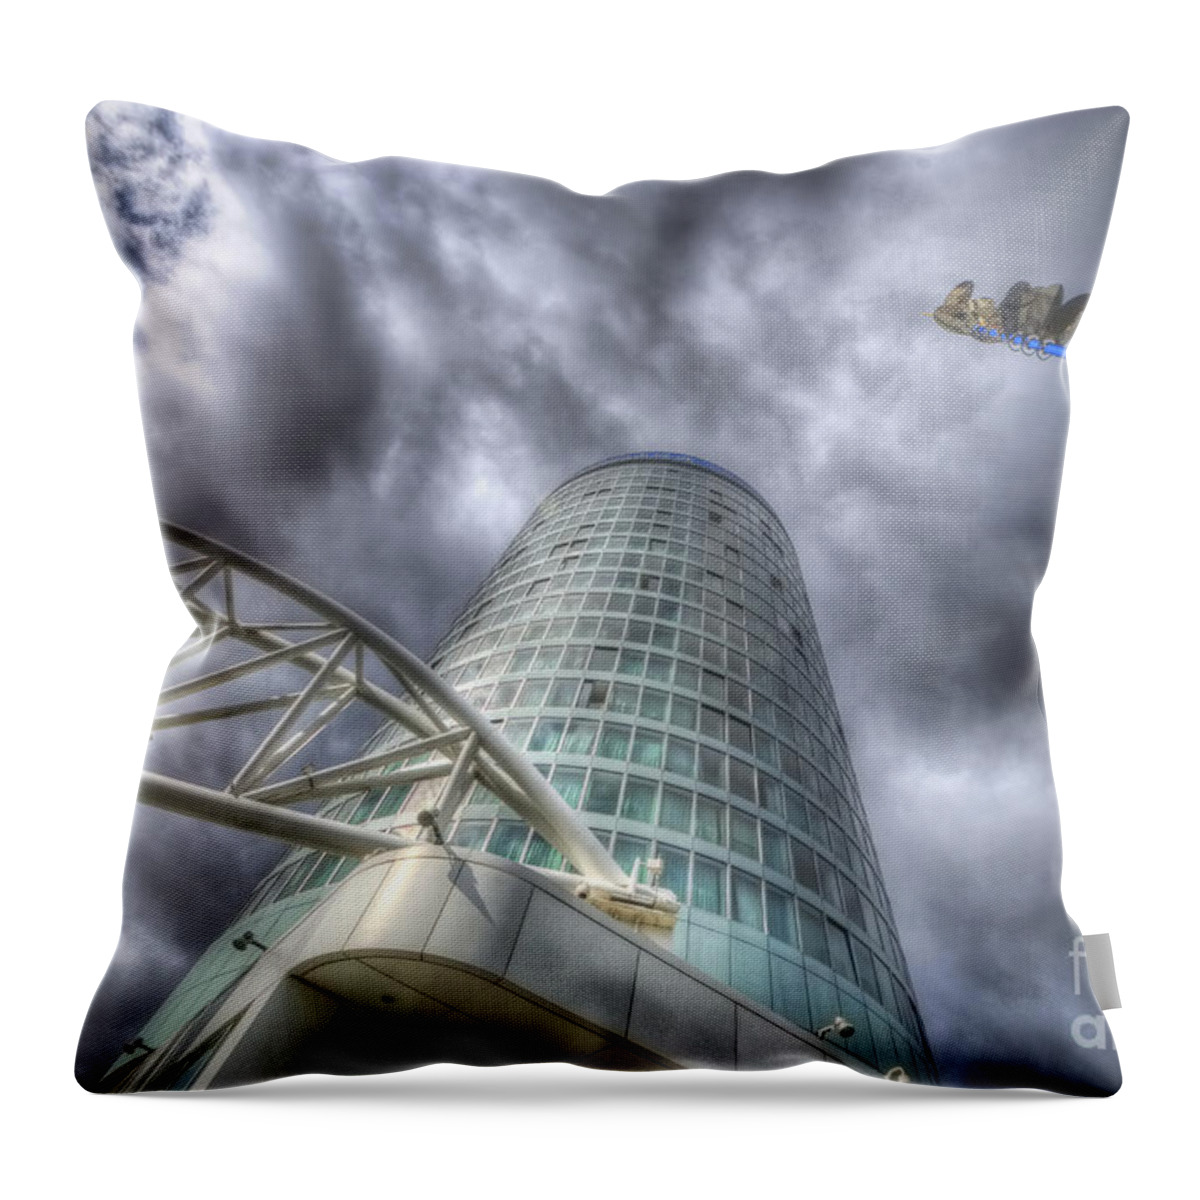 Art Throw Pillow featuring the photograph Sky Is The Limit 2.0 by Yhun Suarez